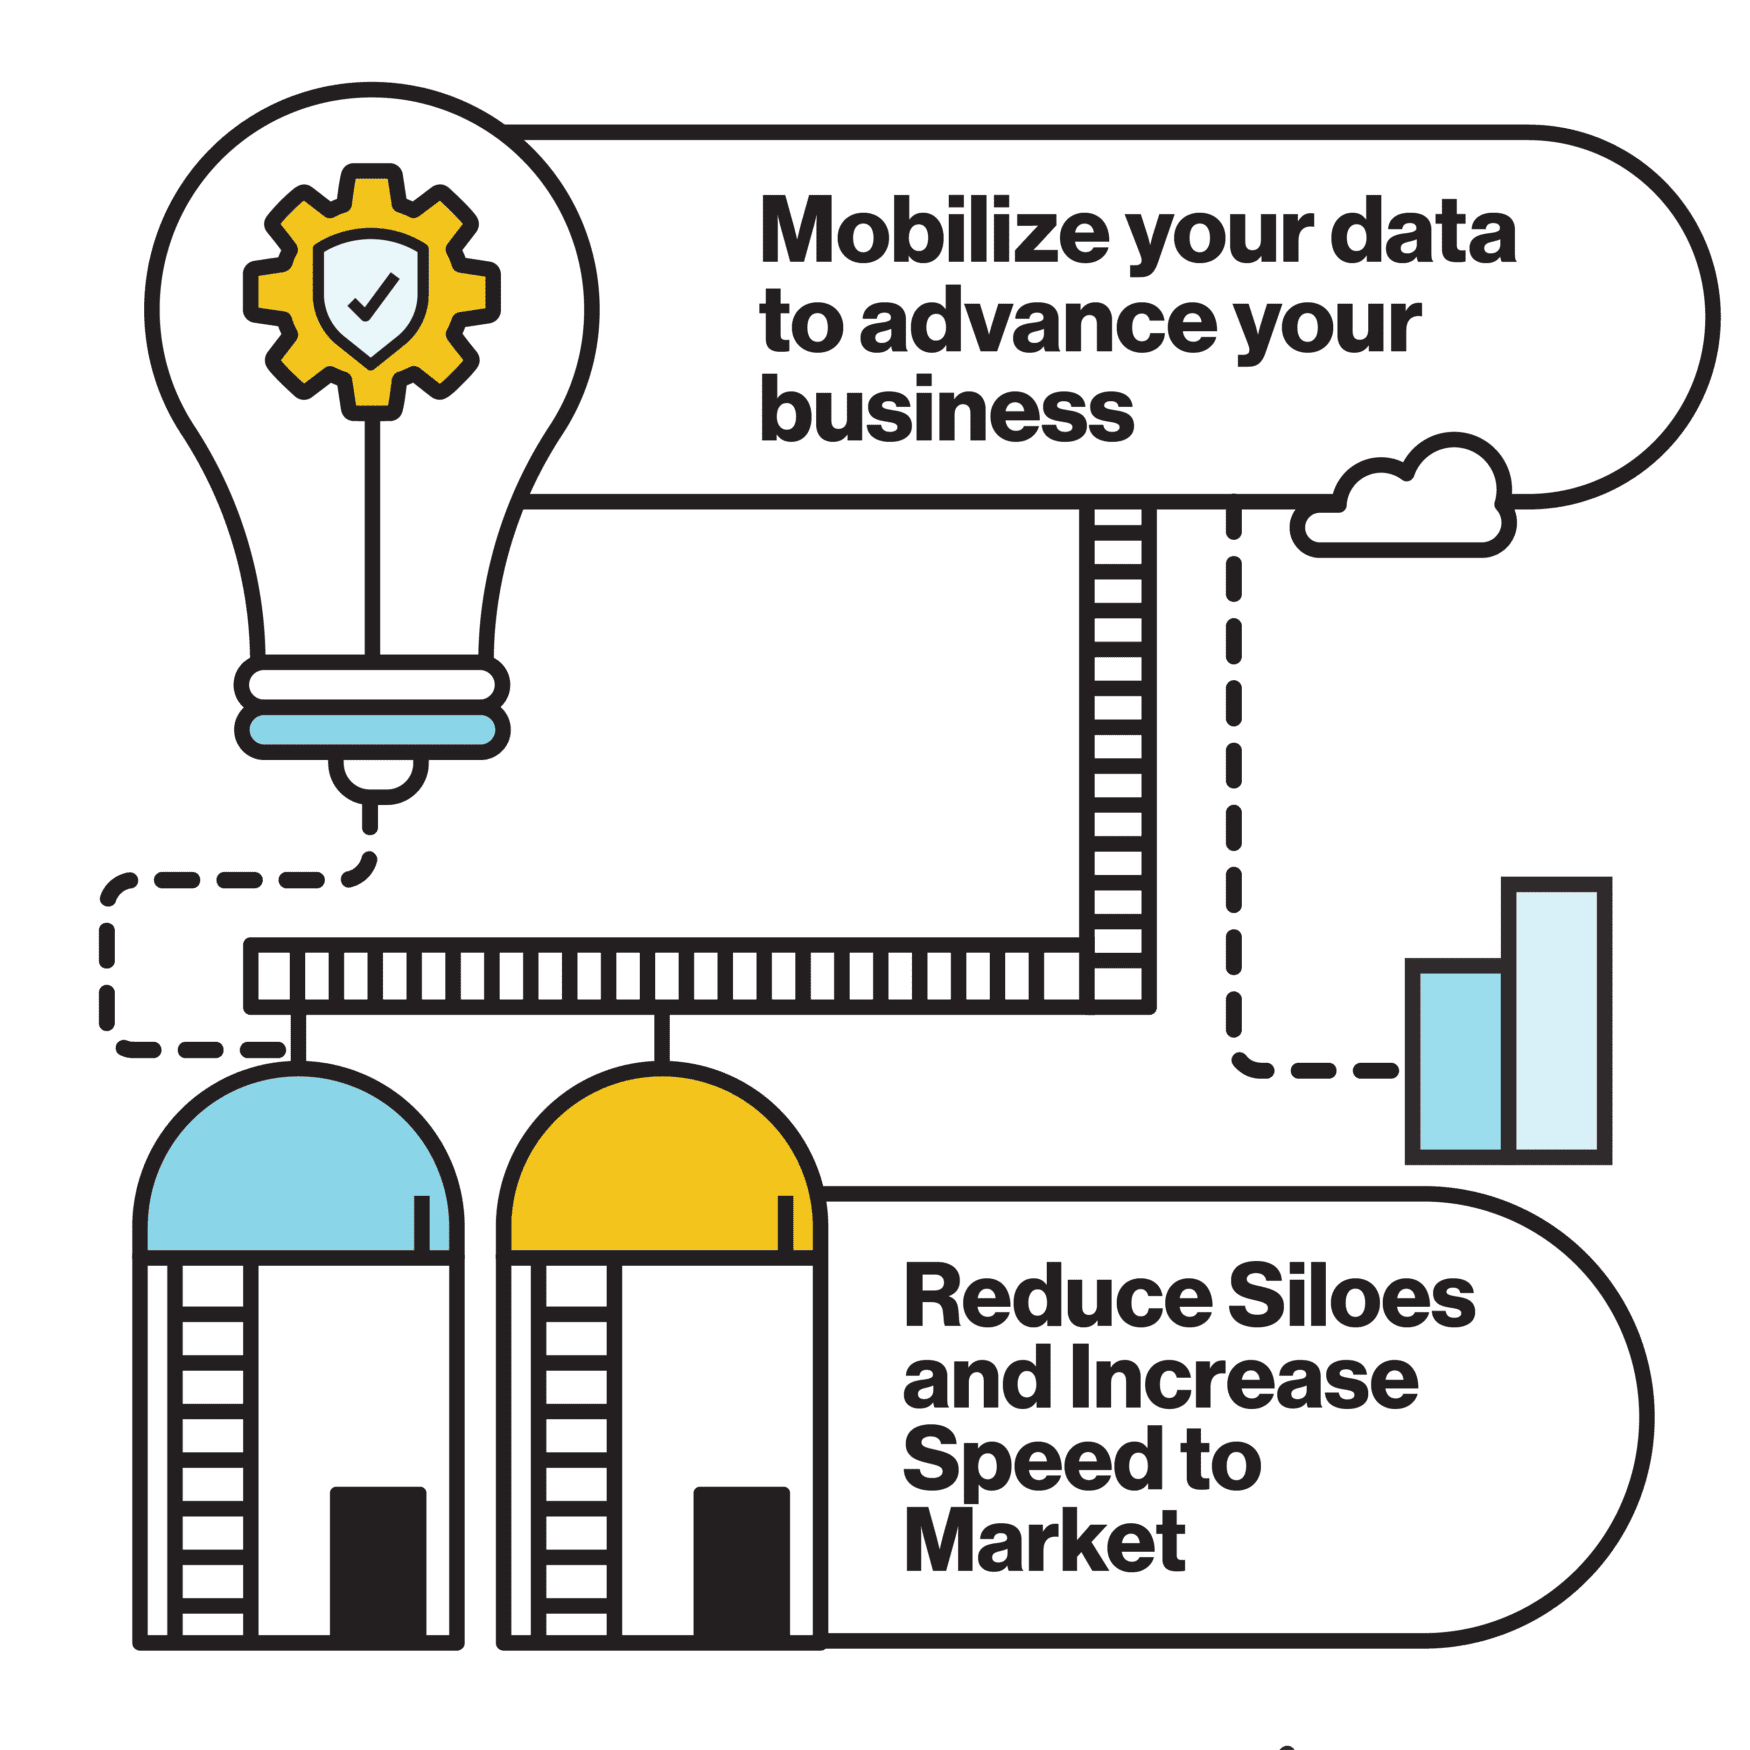 Mobilize your data to advance your business. Reduce Siloes and Increase Speed to Market